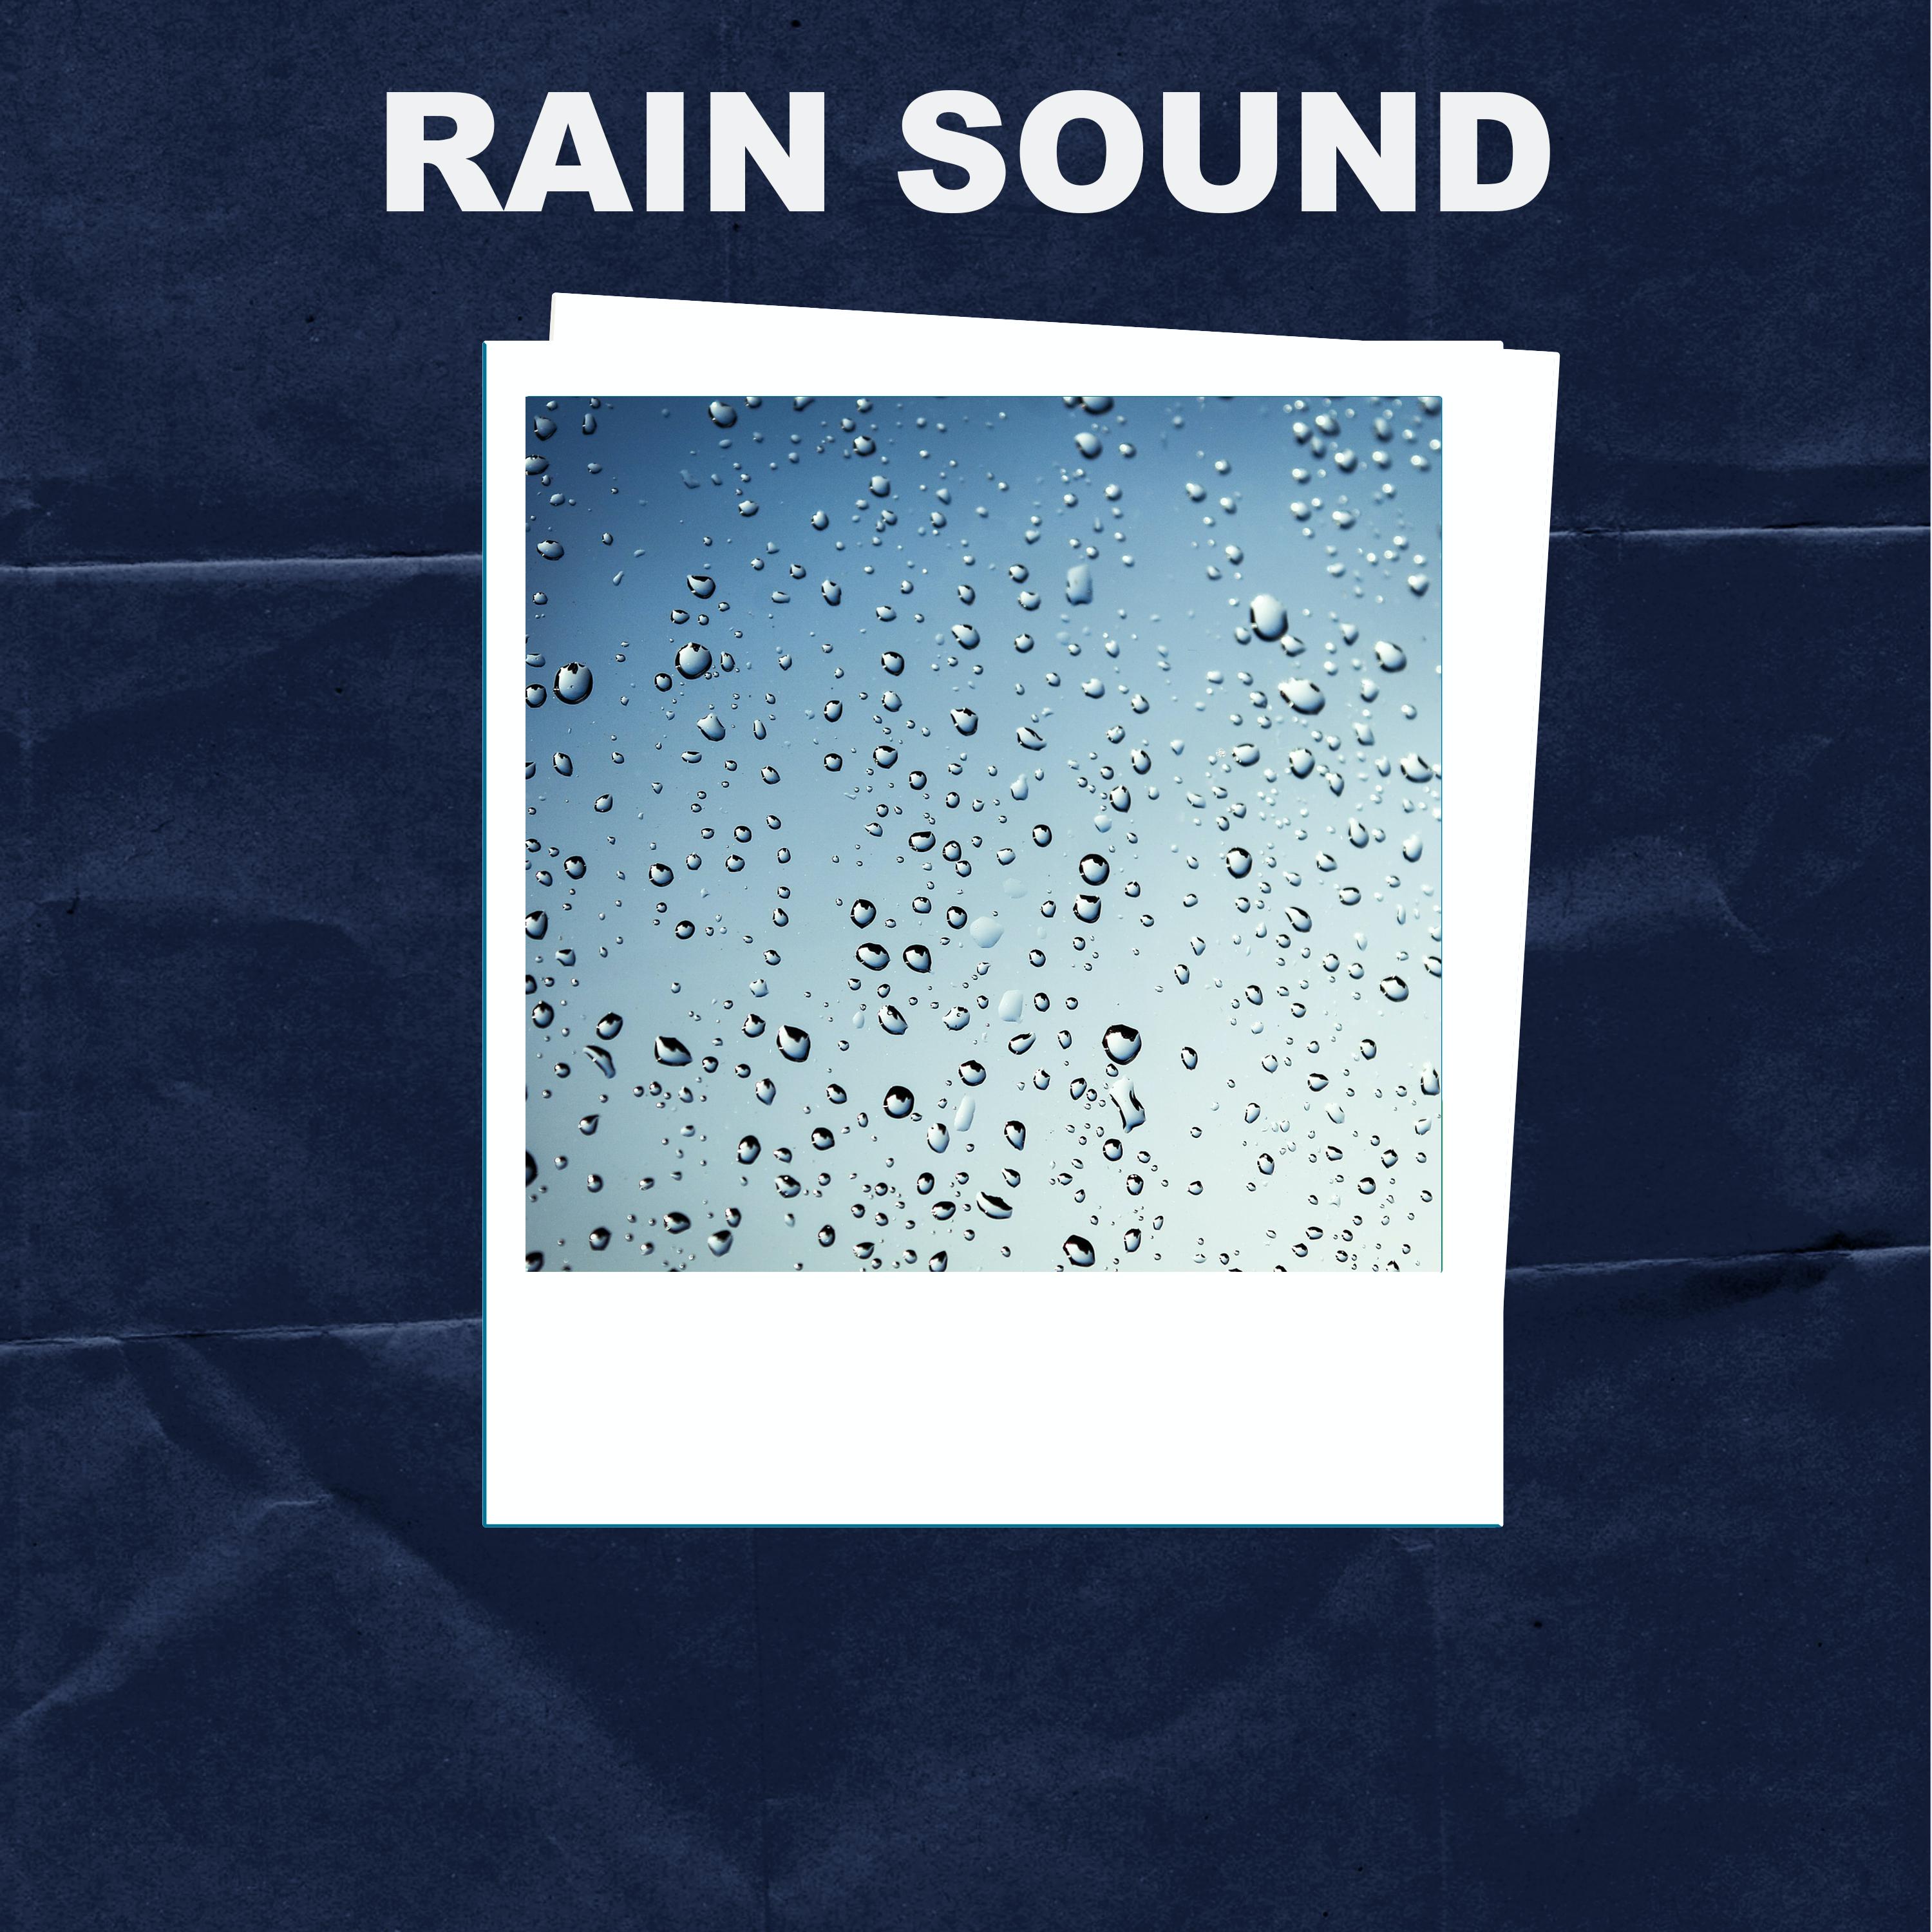 Rain Sounds FX - Never Ending Rain - Loopable With No Fade